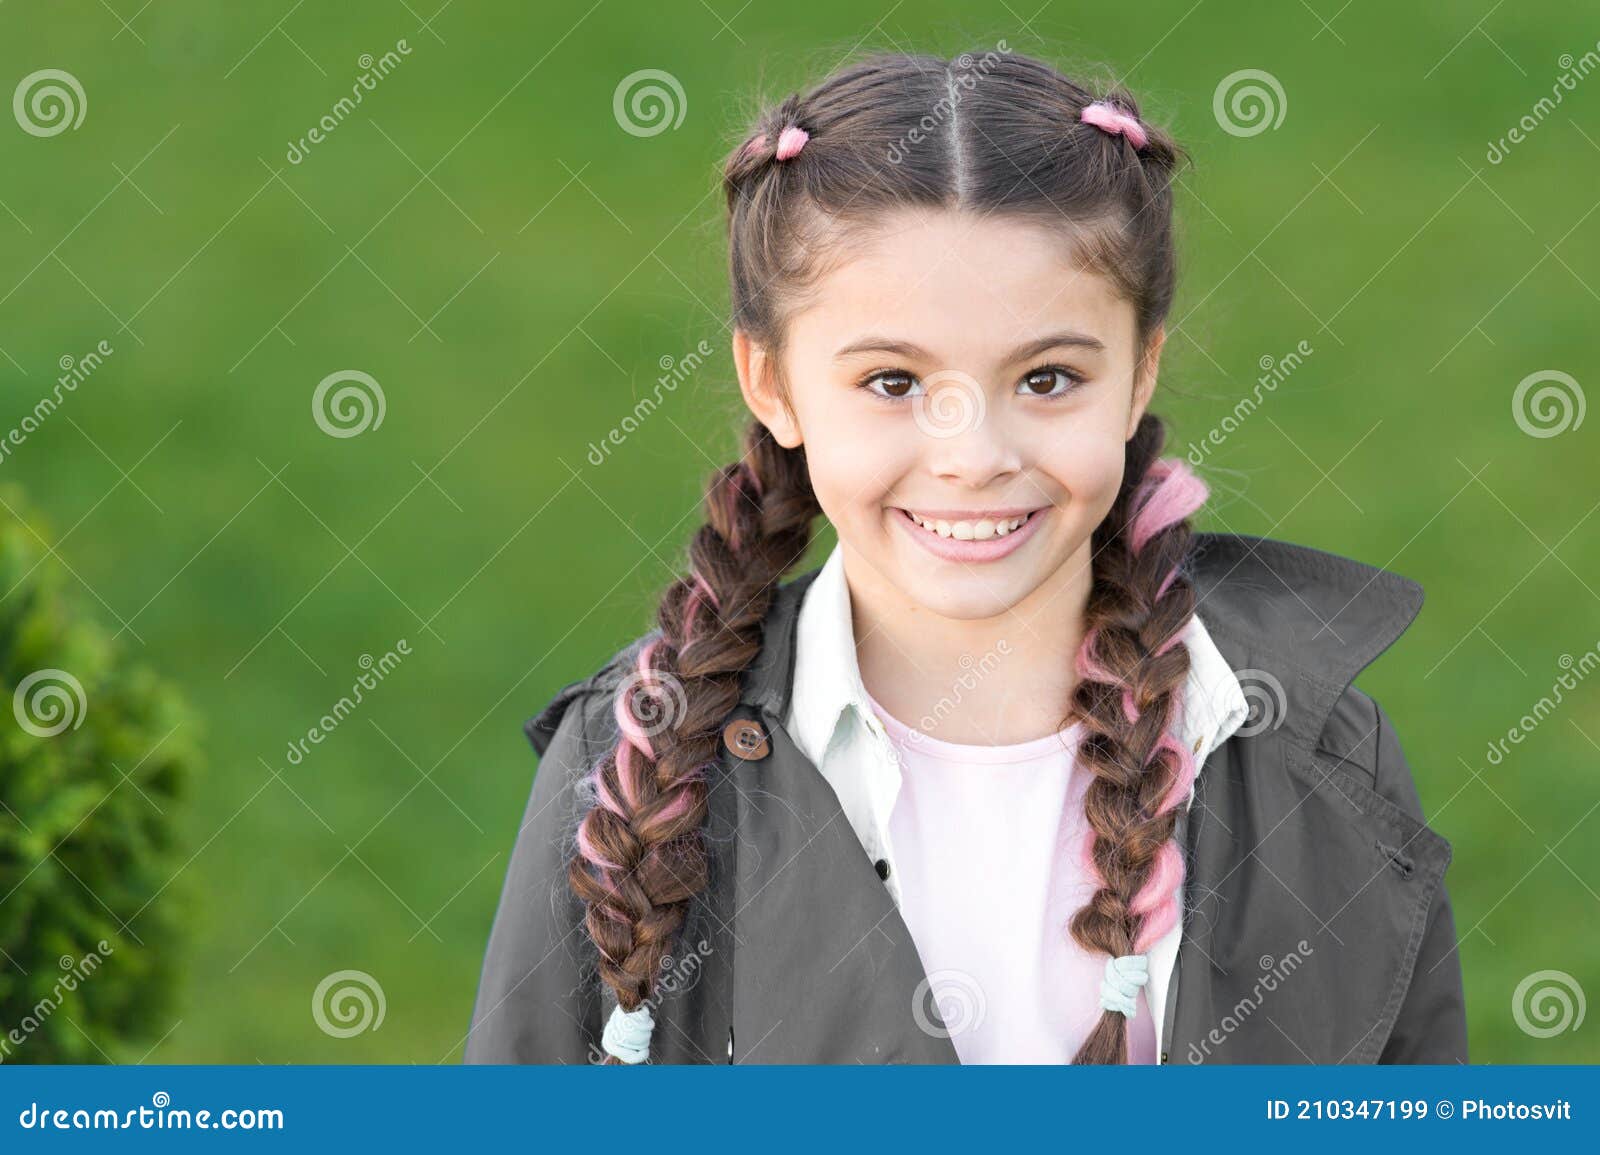 Girl Small Kid with Fashionable Braids Hairstyle. Fashion Trend. Salon and  Hair Care Stock Image - Image of cute, adorable: 210347199